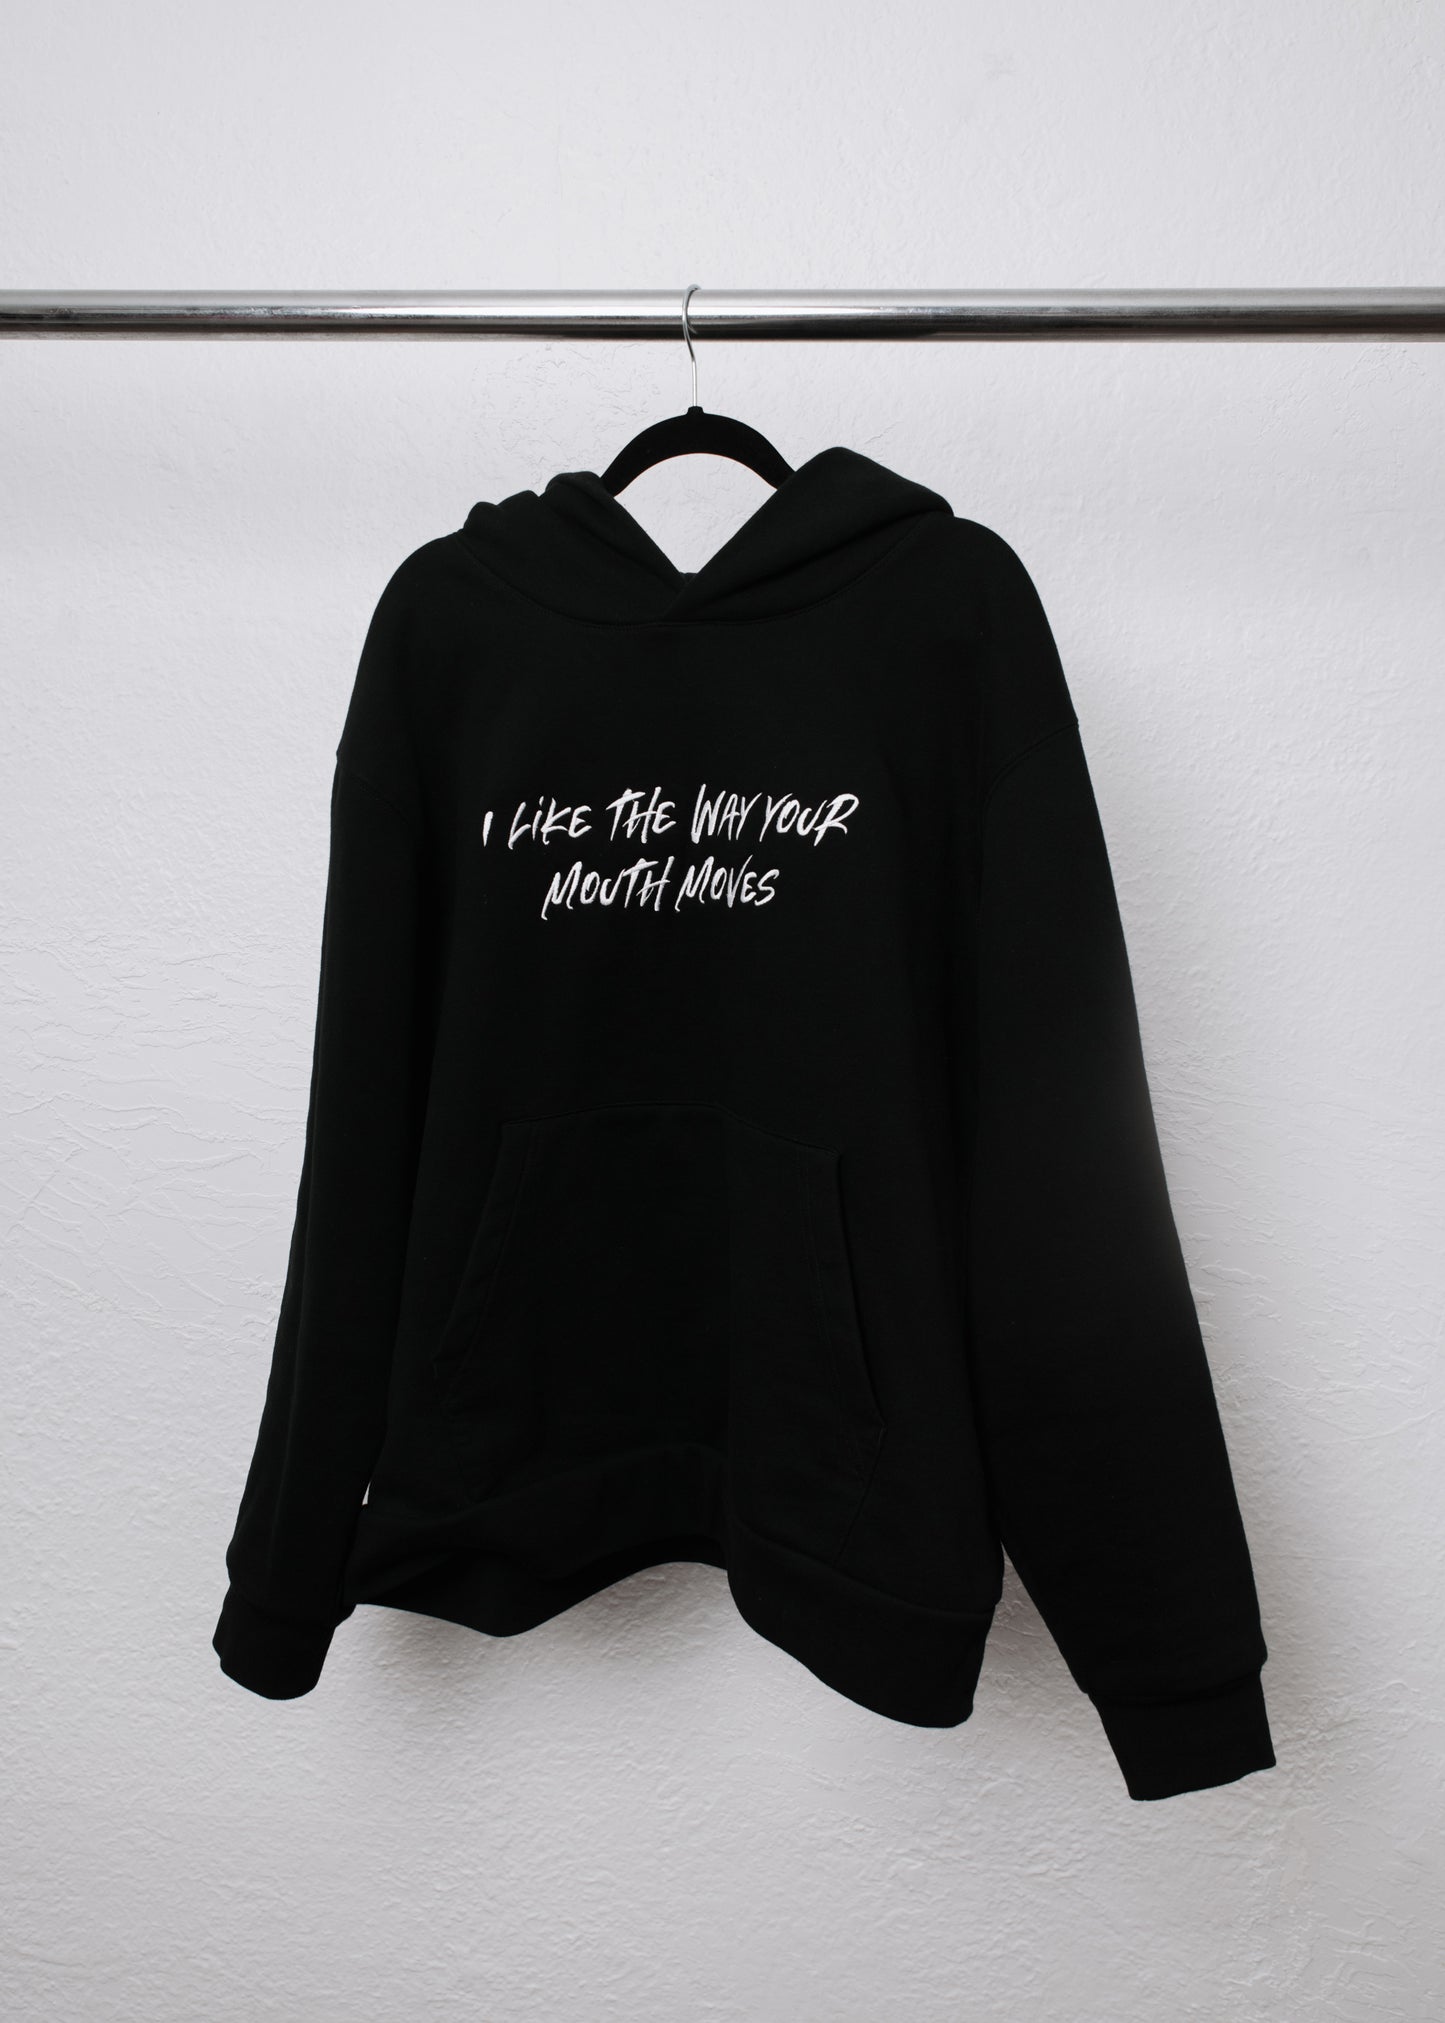 "When You Say My Name" Hoodie - Summer 2023 Limited Edition